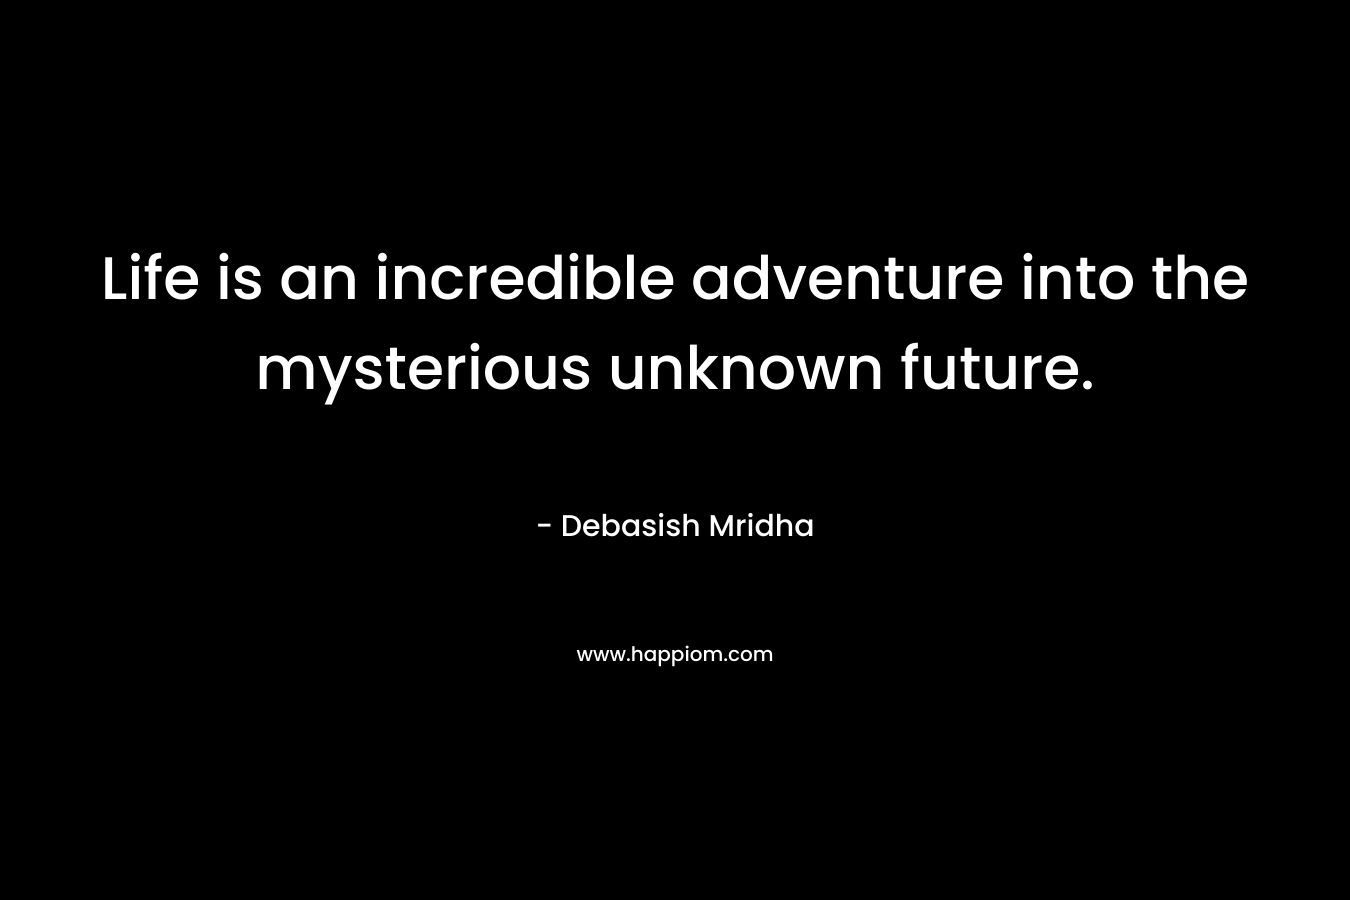 Life is an incredible adventure into the mysterious unknown future.